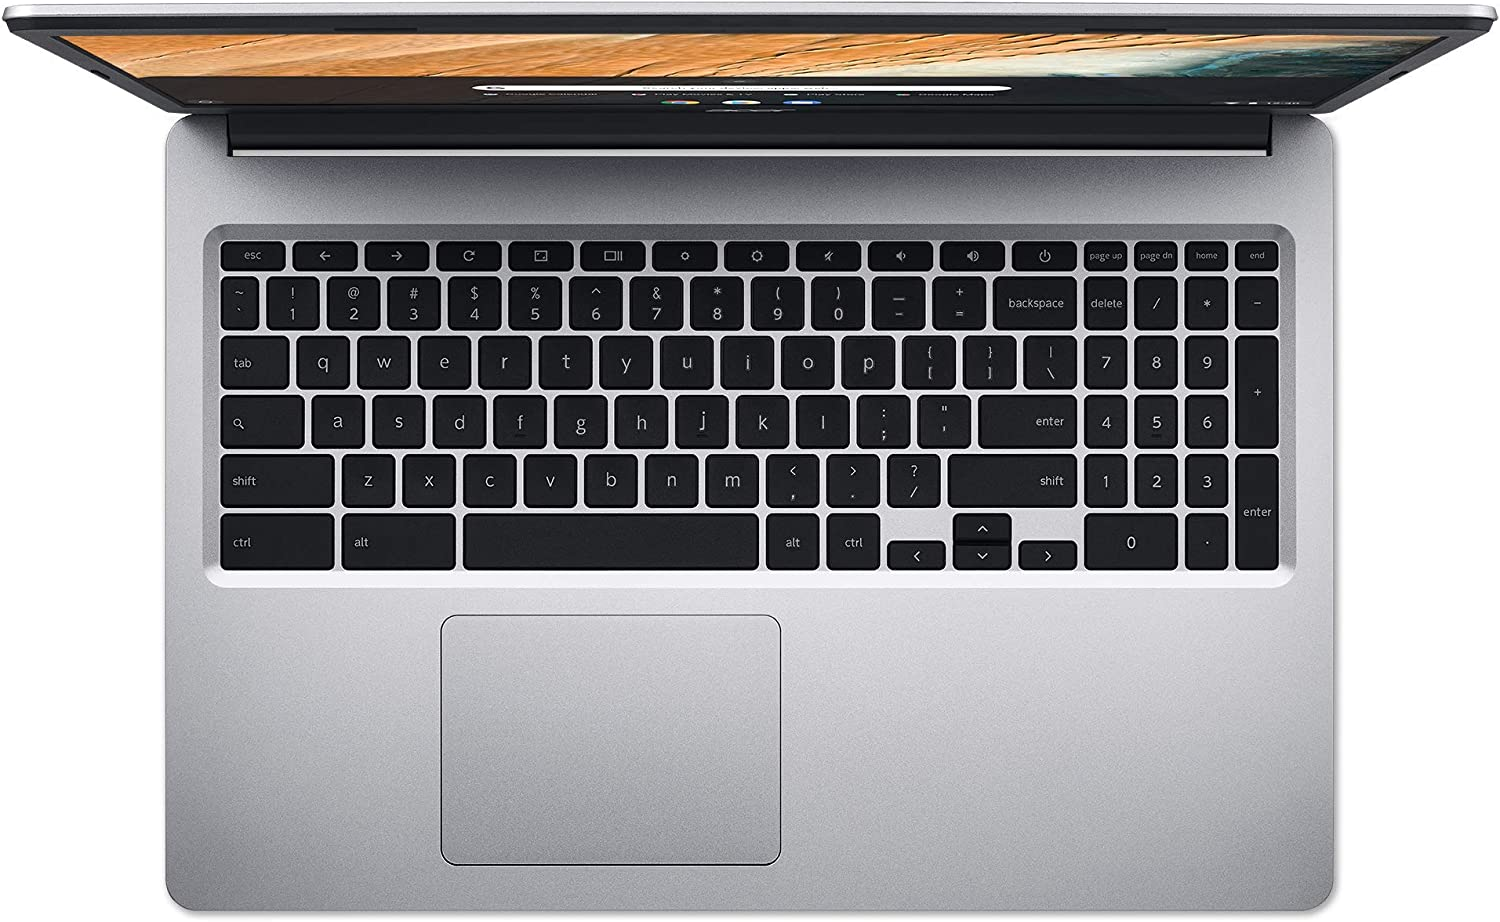 This image shows the keyboard and touchpad of the Acer Chromebook 315 2022.